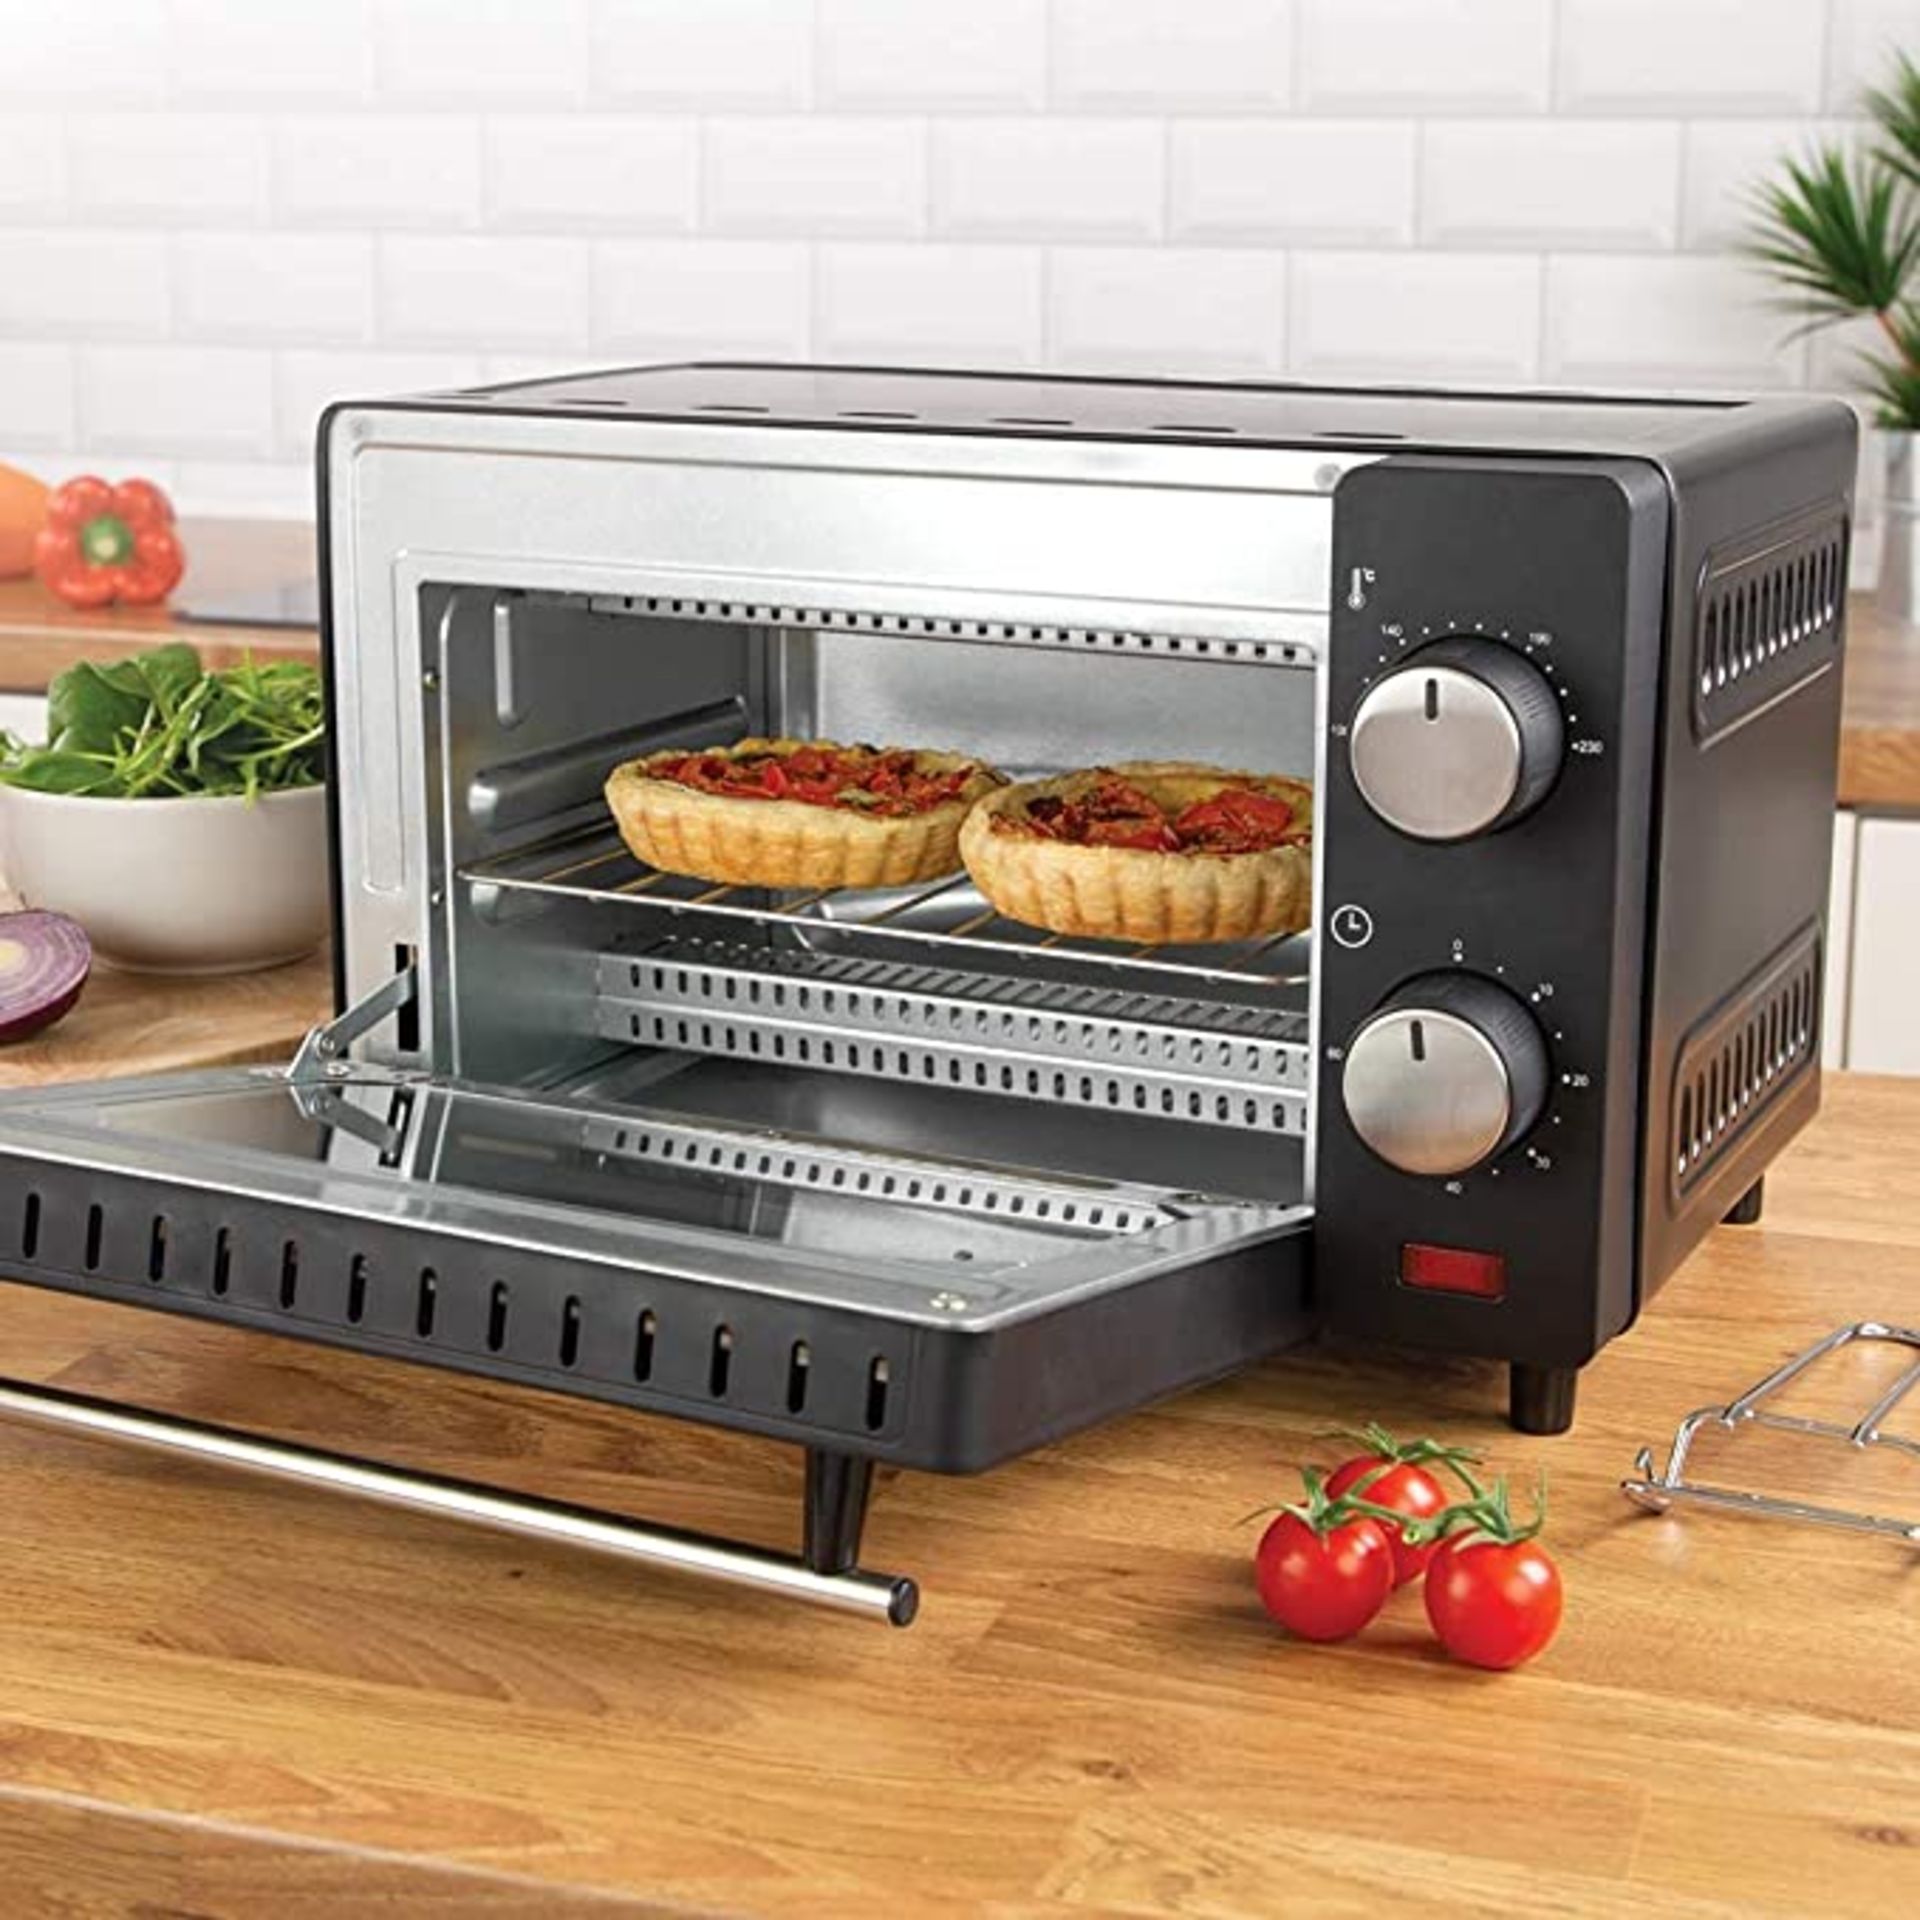 Quest 35409 Compact 9L Mini Oven/Temperature Controlled from 100-230° / 60 Minute Timer with Auto